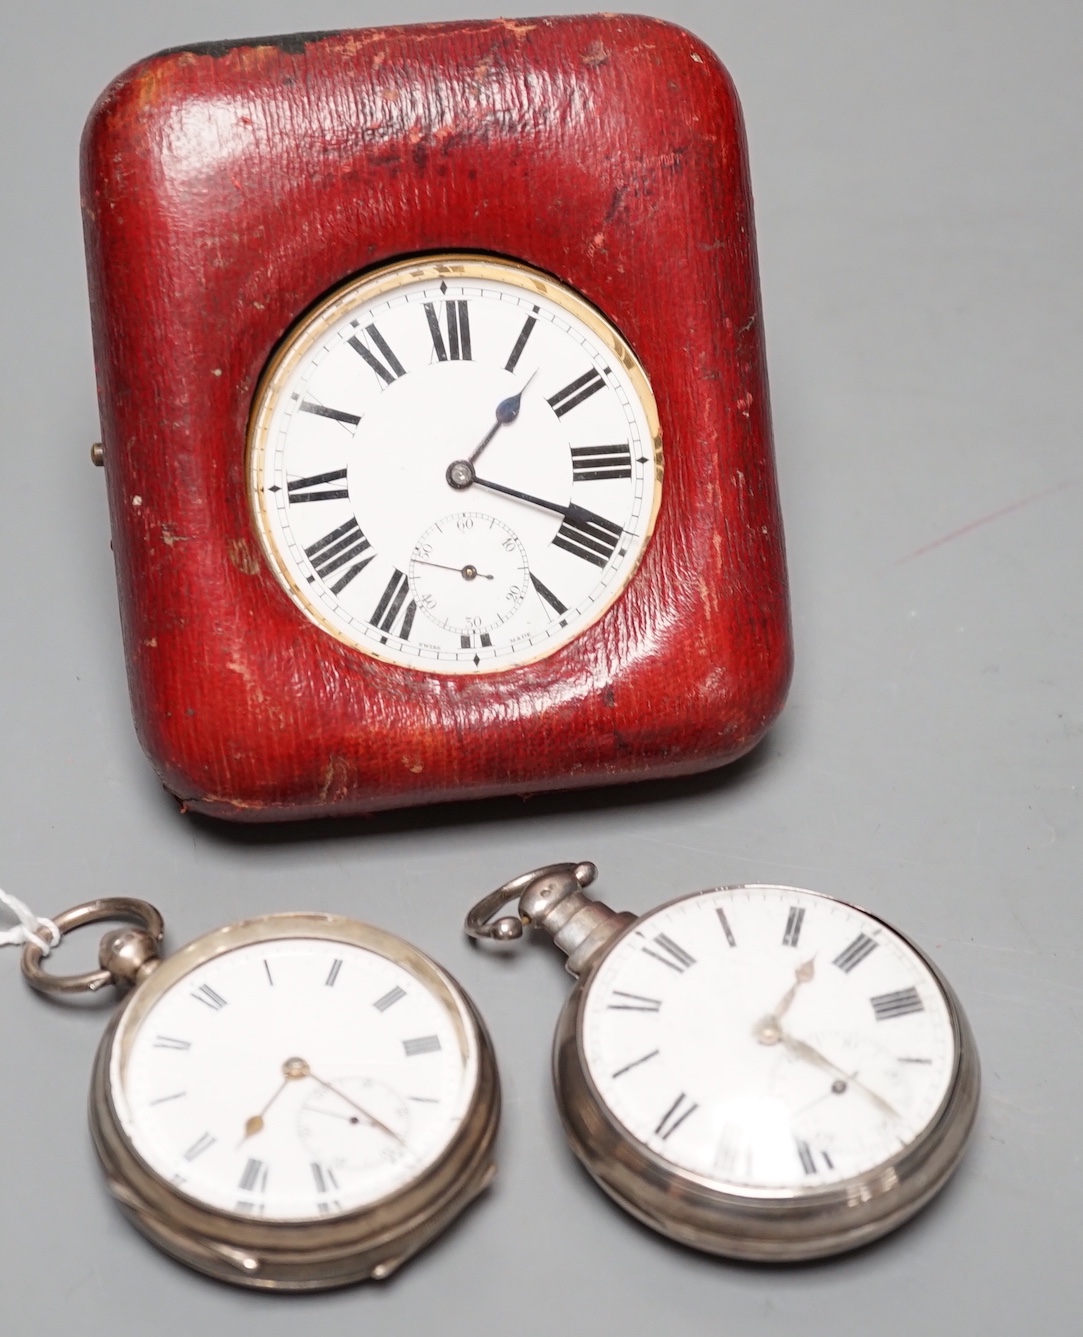 A George IV silver pair cased pocket watch by J. Levy & Son and two other pocket watches including one silver.